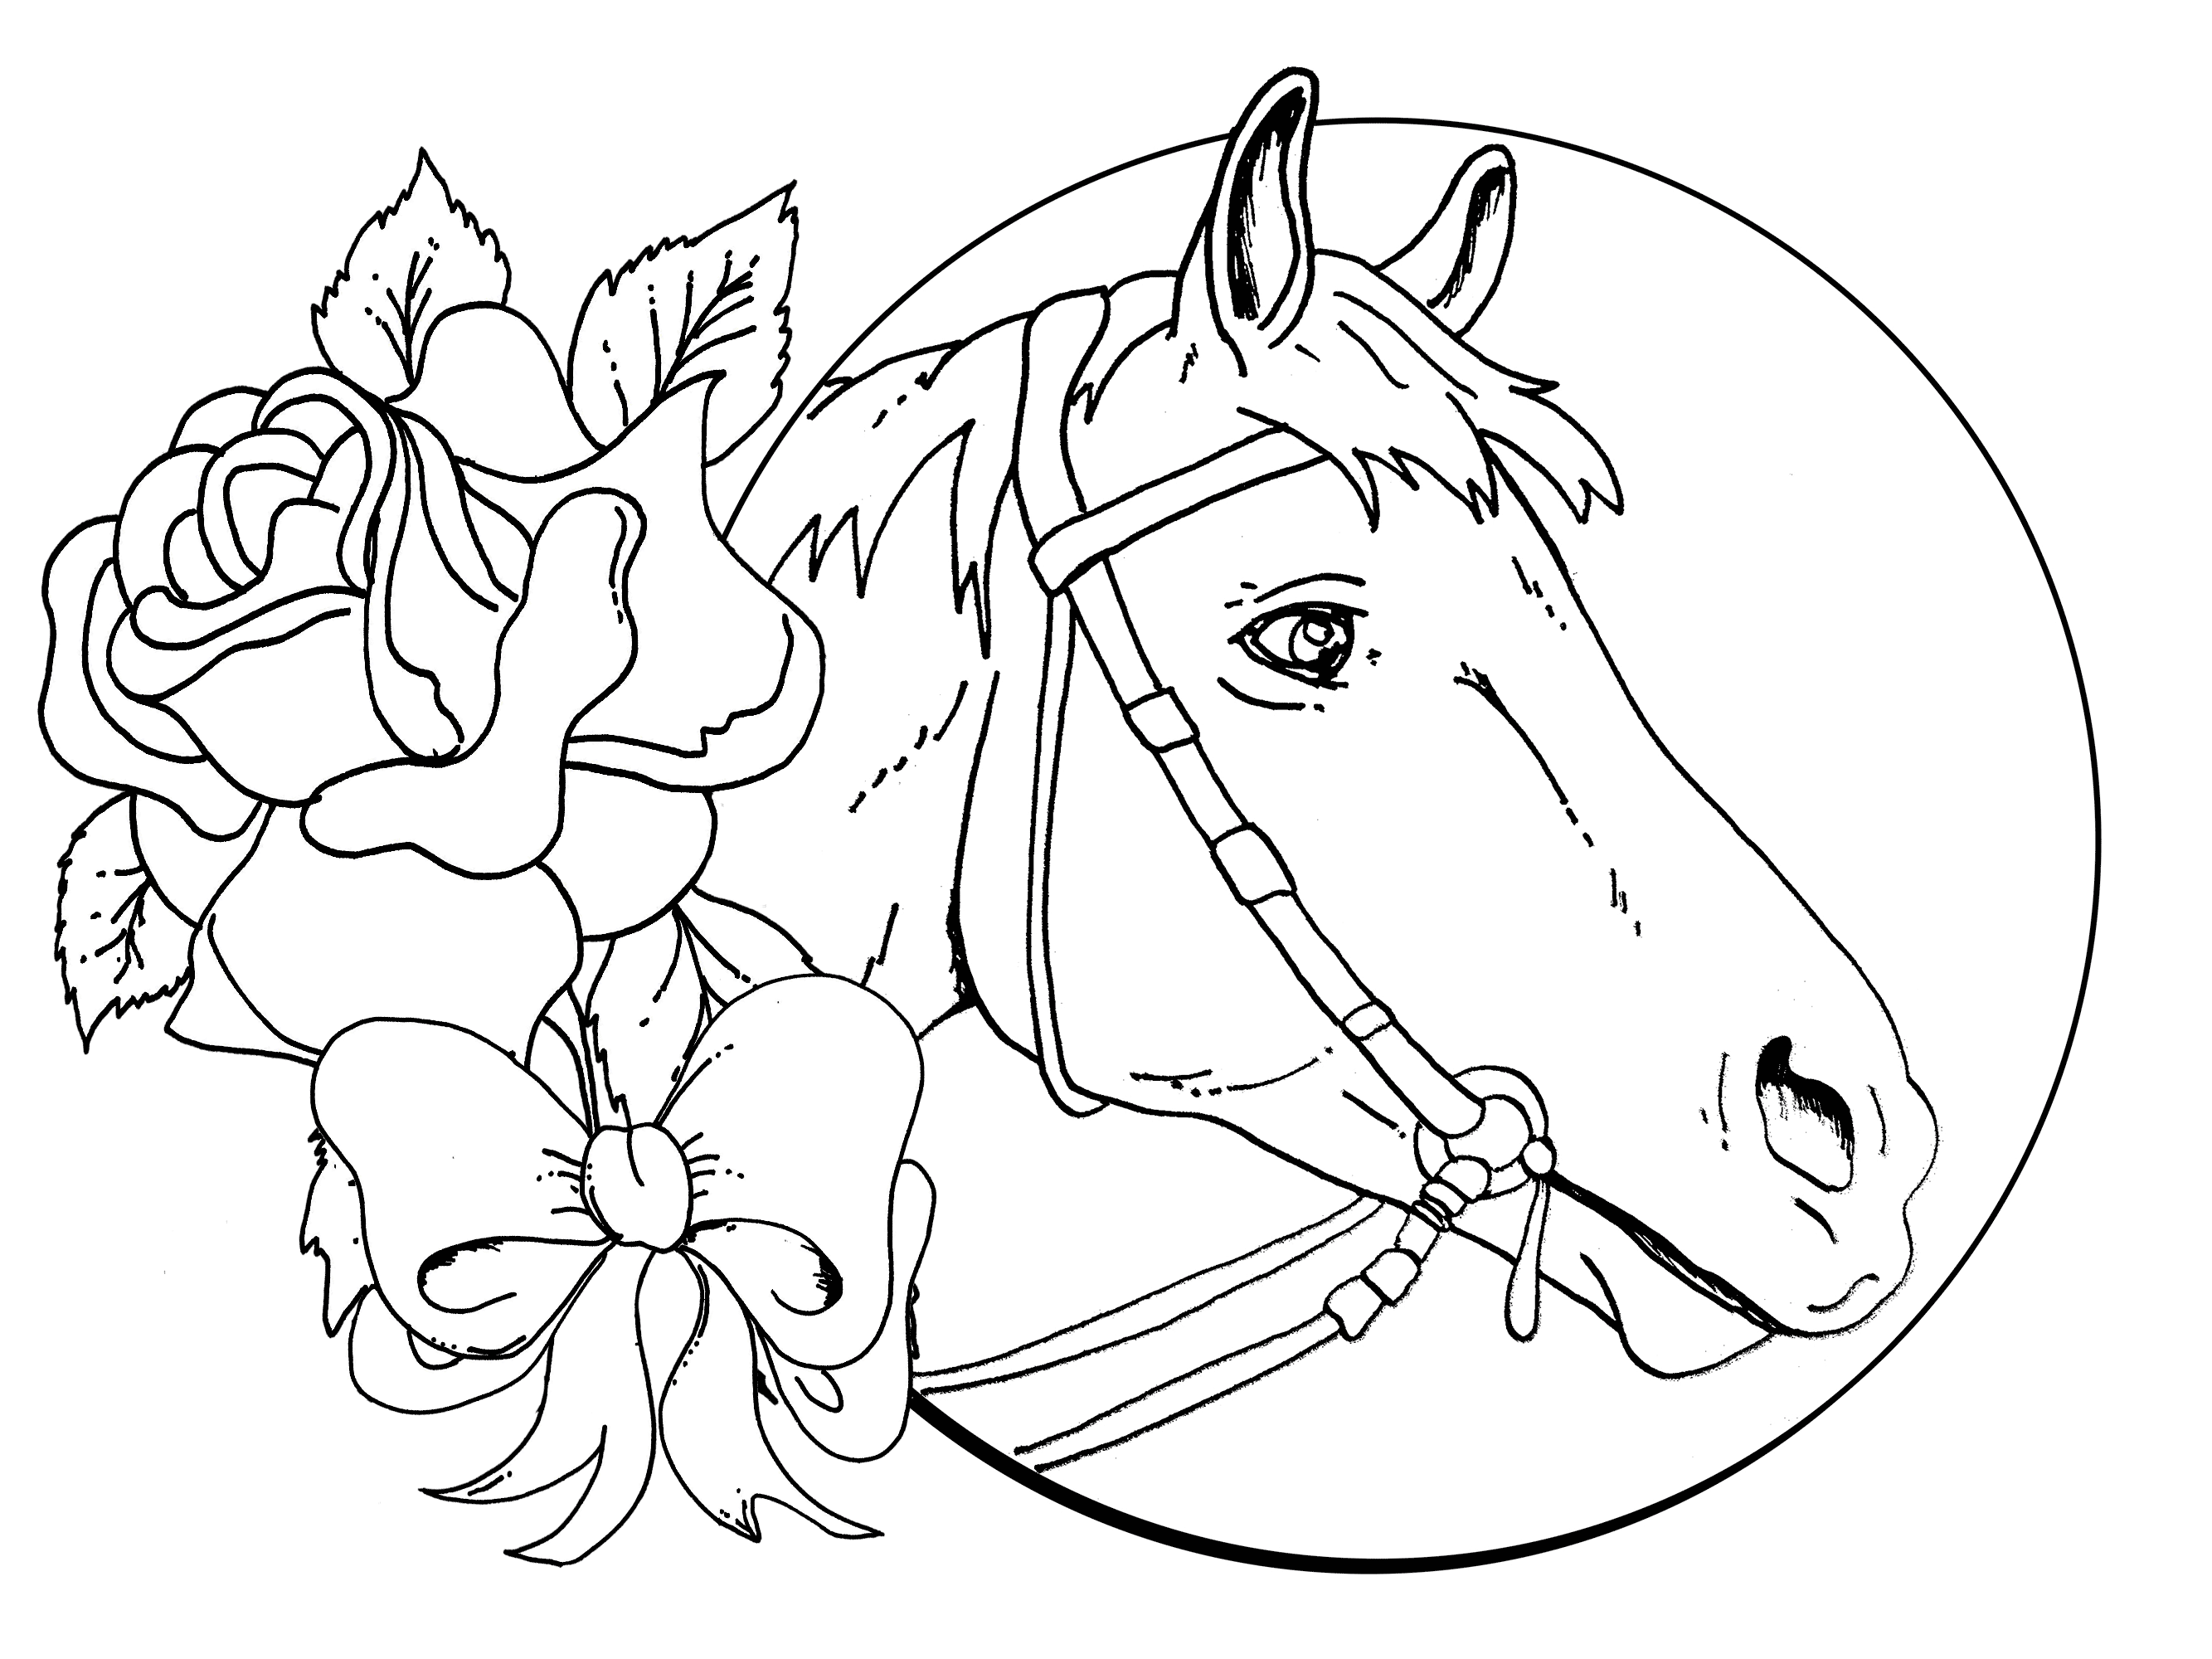 free horse pictures to color online free horse coloring pages color horse pictures online to free 